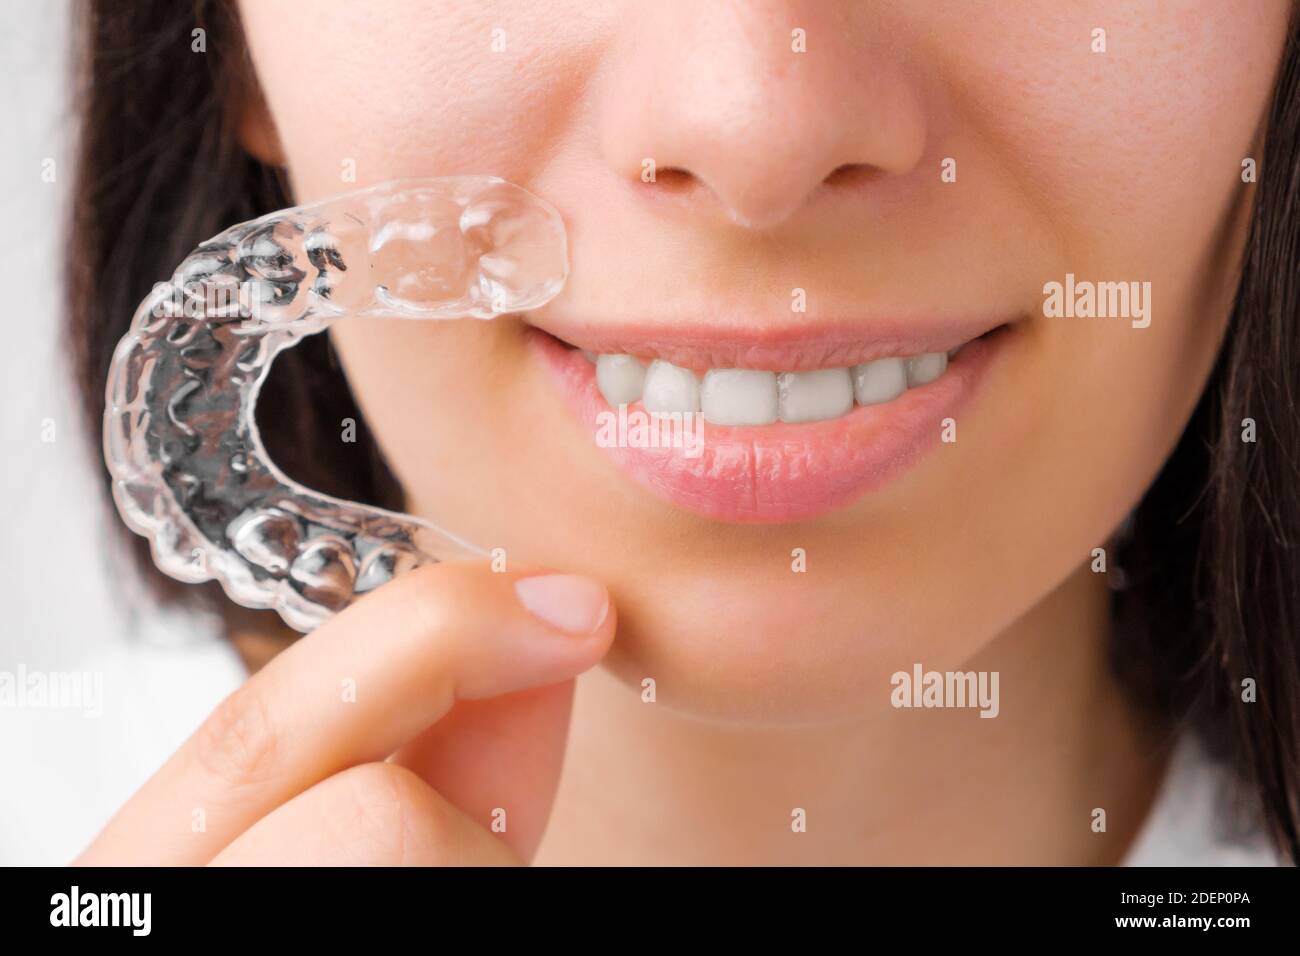 Close up woman holding a transparent removable braces for perfect smile. Orthodontic aligners for straightening and whitening teeth. Stock Photo